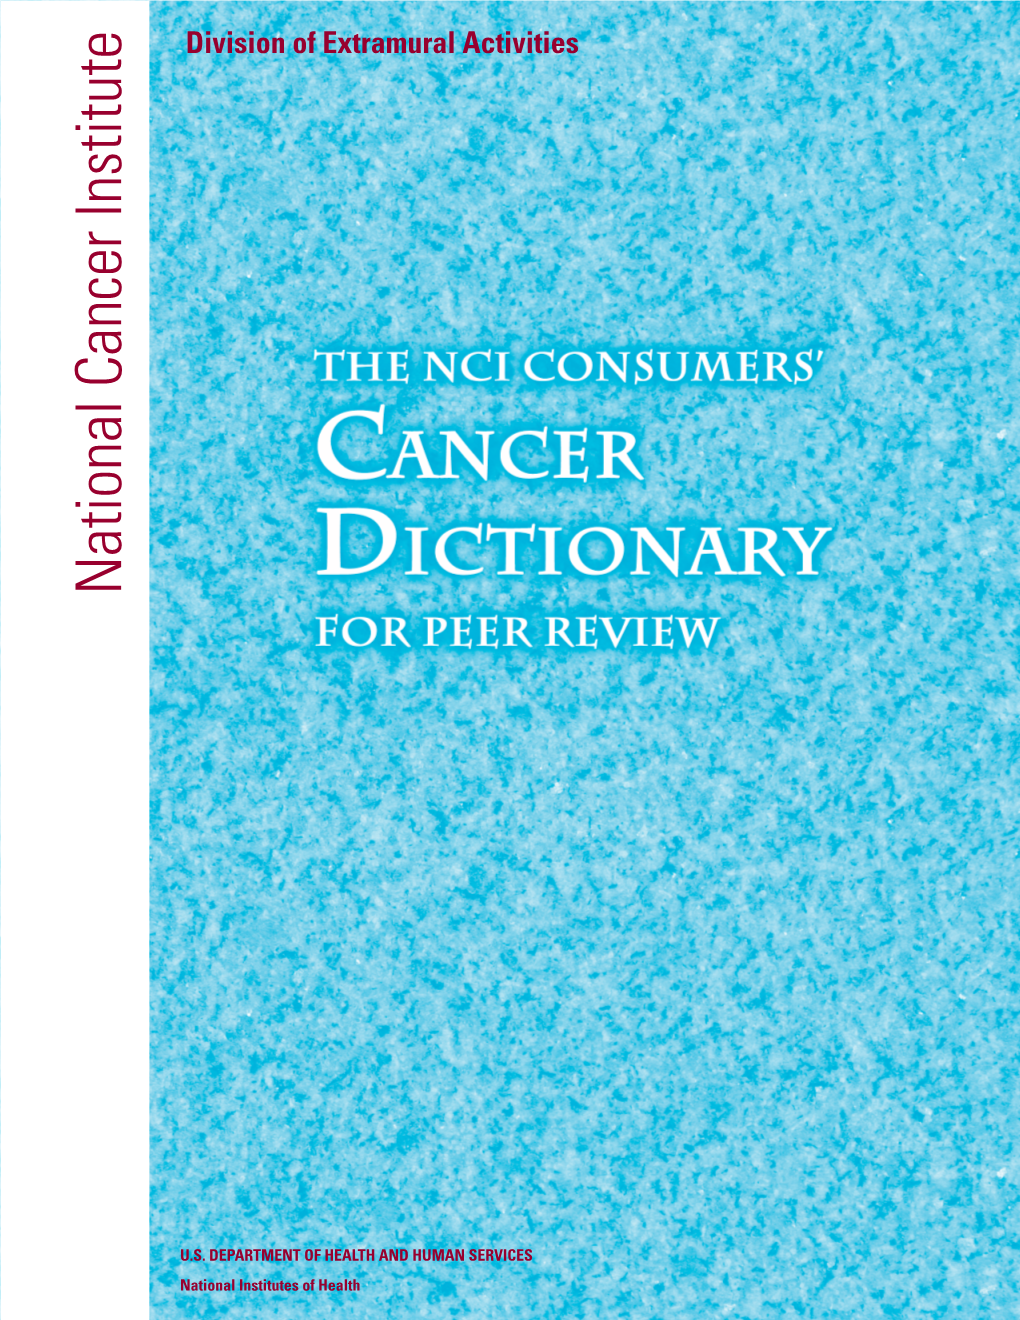 Consumers' Cancer Dictionary for Peer Review